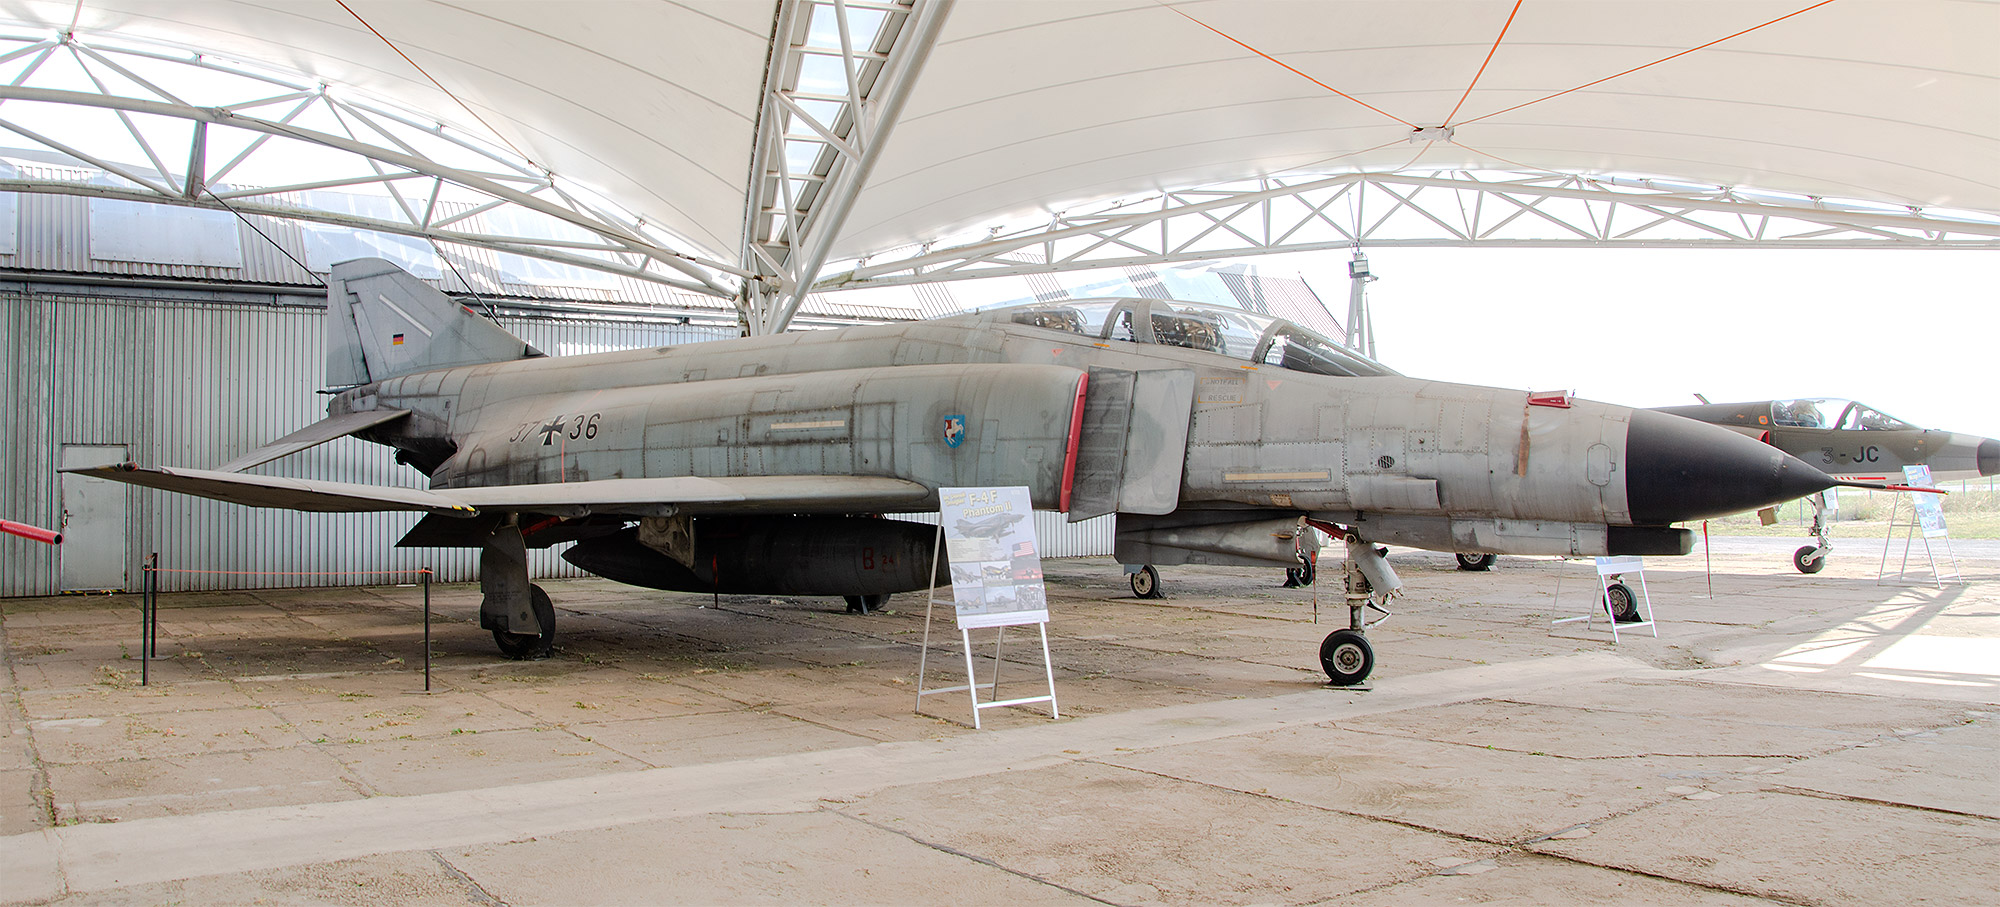 37+36 on display at the Museum of Aviation in Košice